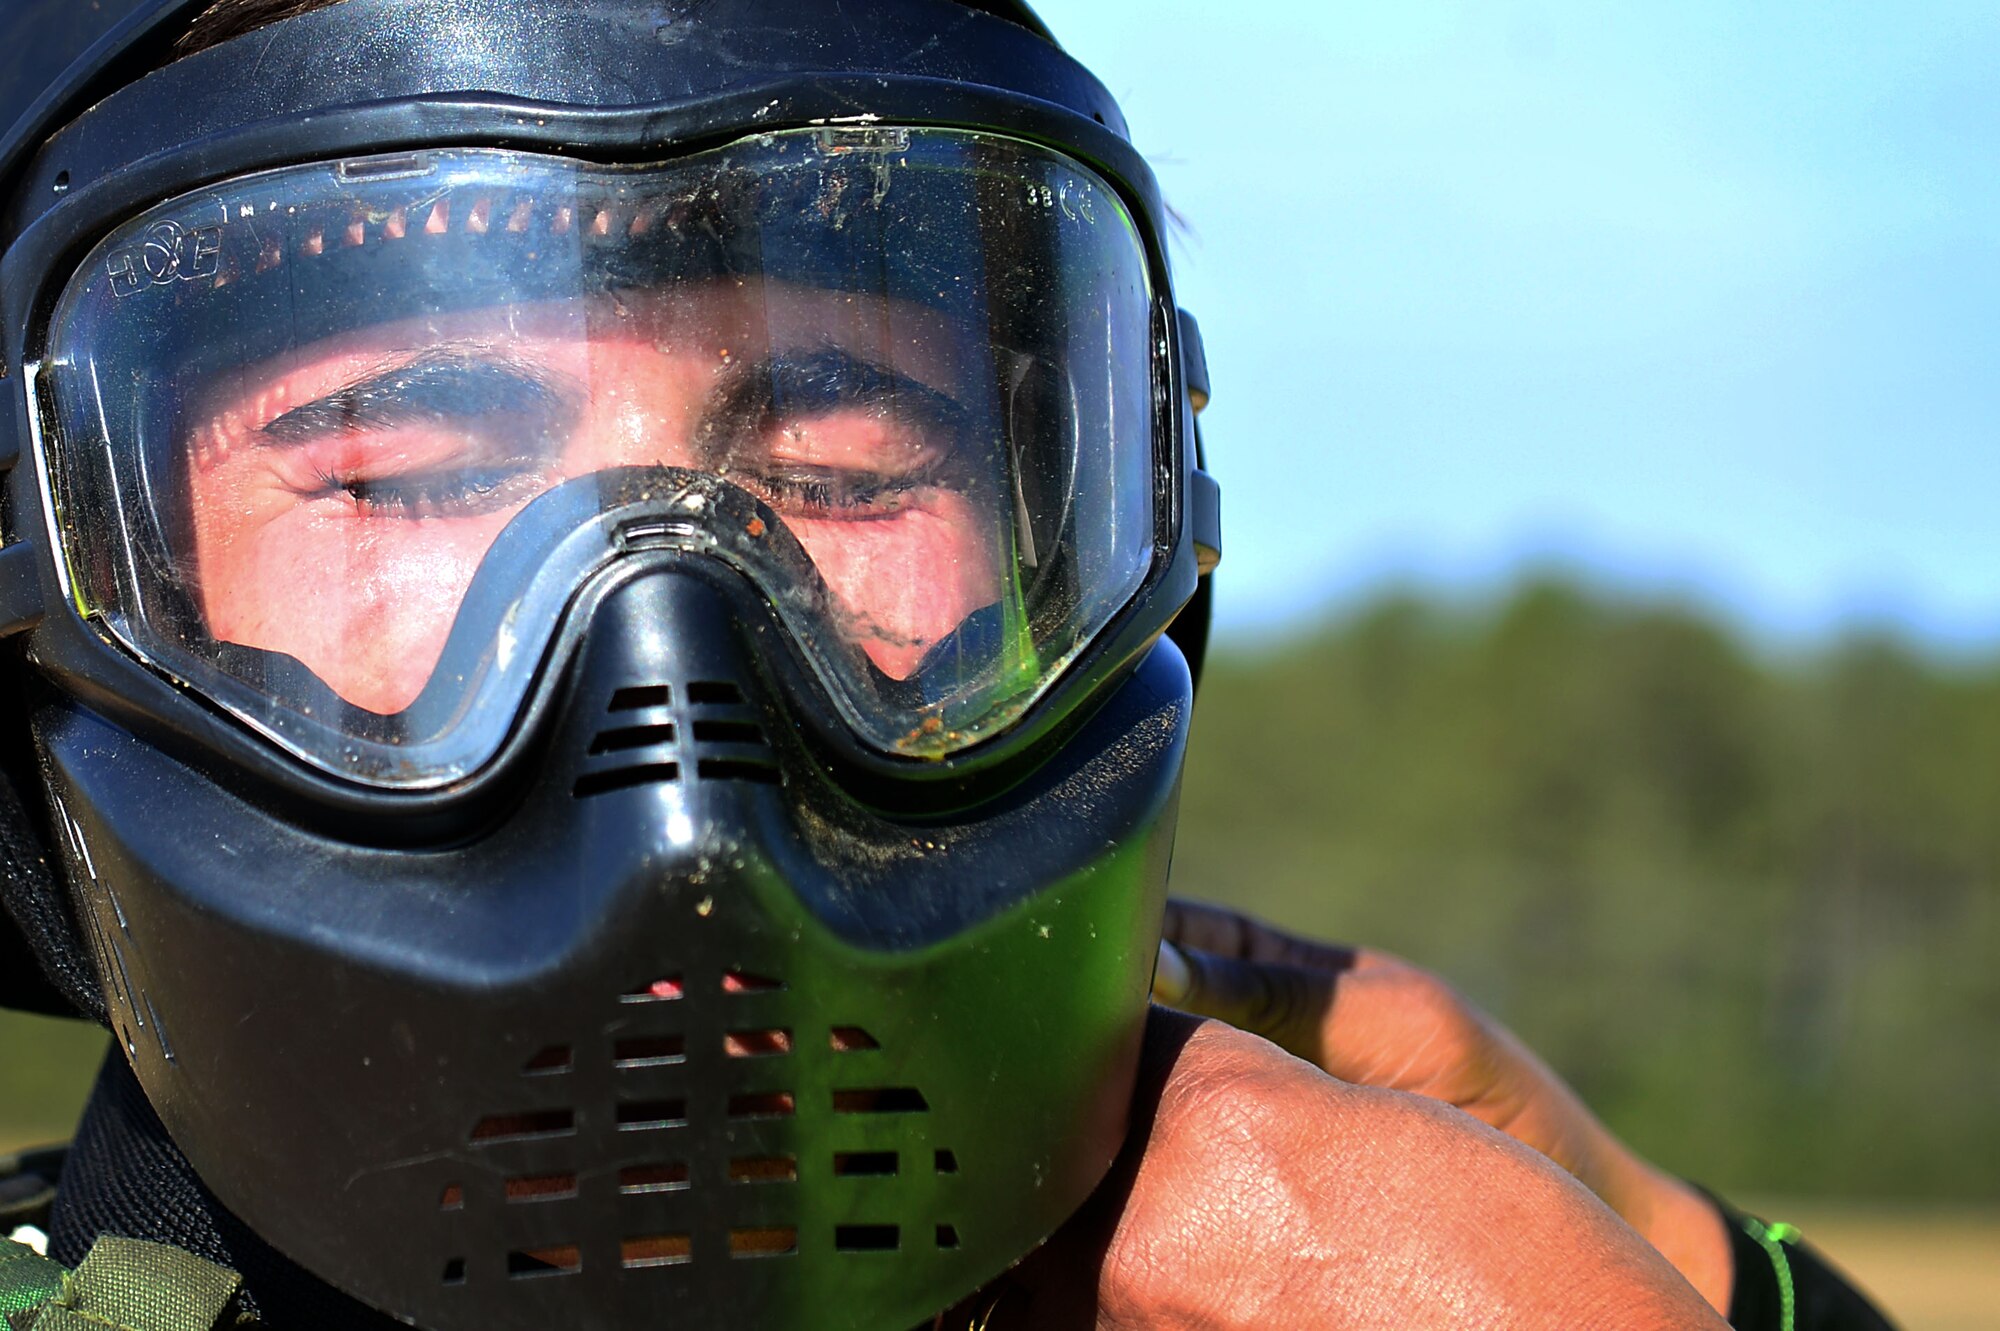 U.S. Air Force Staff Sgt. Zachary Nolan, 20th Component Maintenance Squadron aerospace propulsion technician, dons his protective gear during a 20th Security Forces Squadron Combat Challenge at Shaw Air Force Base, S.C., March 24, 2017. Airmen participating in the course arrived to a combat training facility called the “shoot house,” and were required to put on a face protector, neck guard and flak vest before firing rubber rounds.  (U.S. Air Force photo by Airman 1st Class Christopher Maldonado)